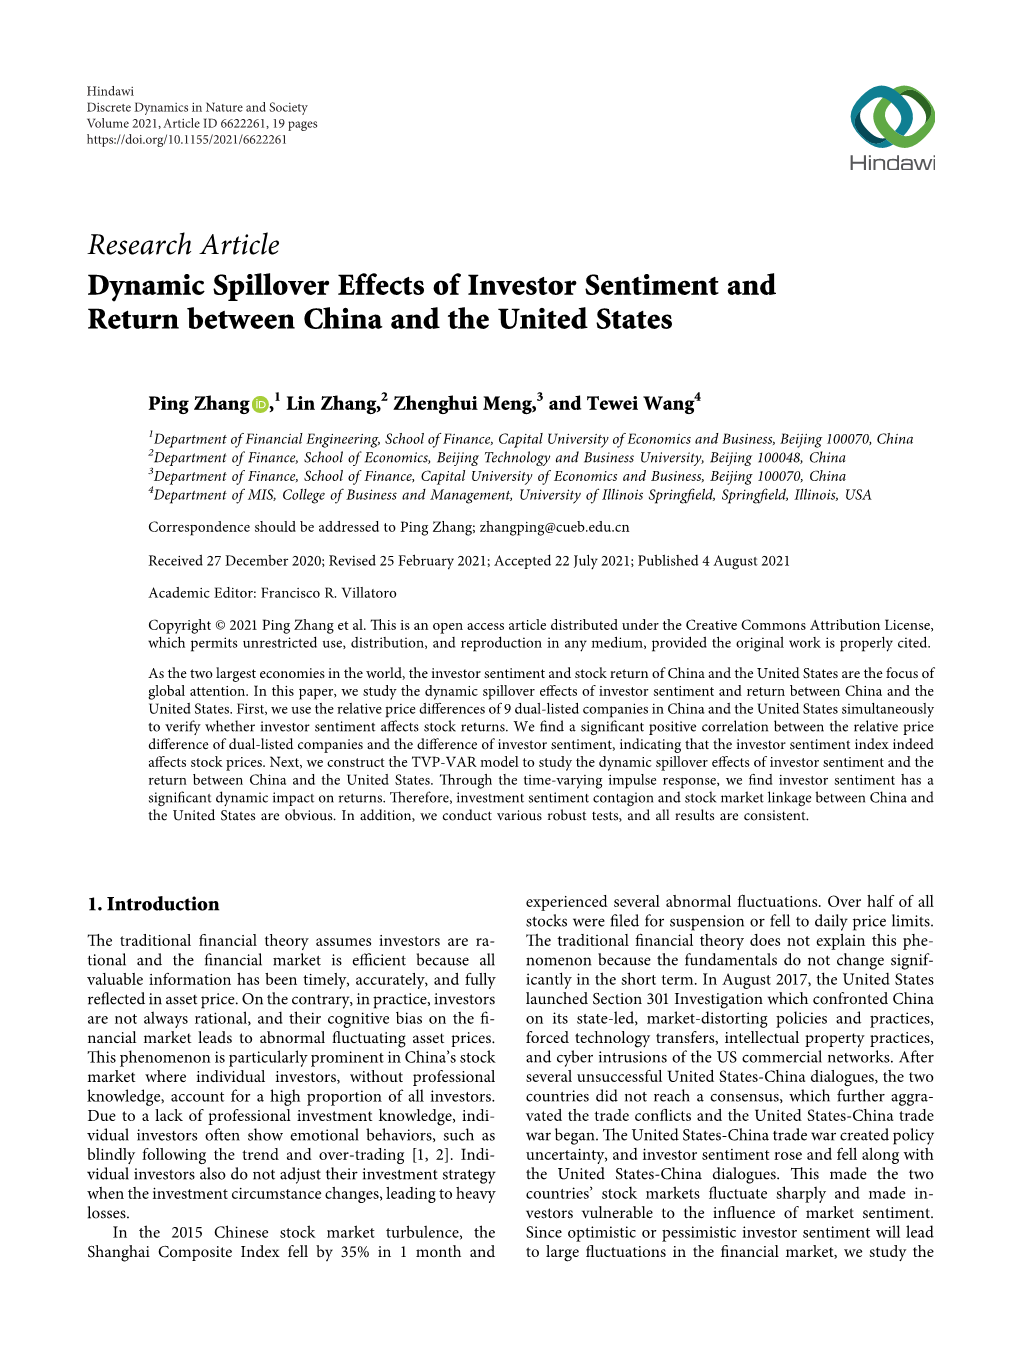 Dynamic Spillover Effects of Investor Sentiment and Return Between China and the United States